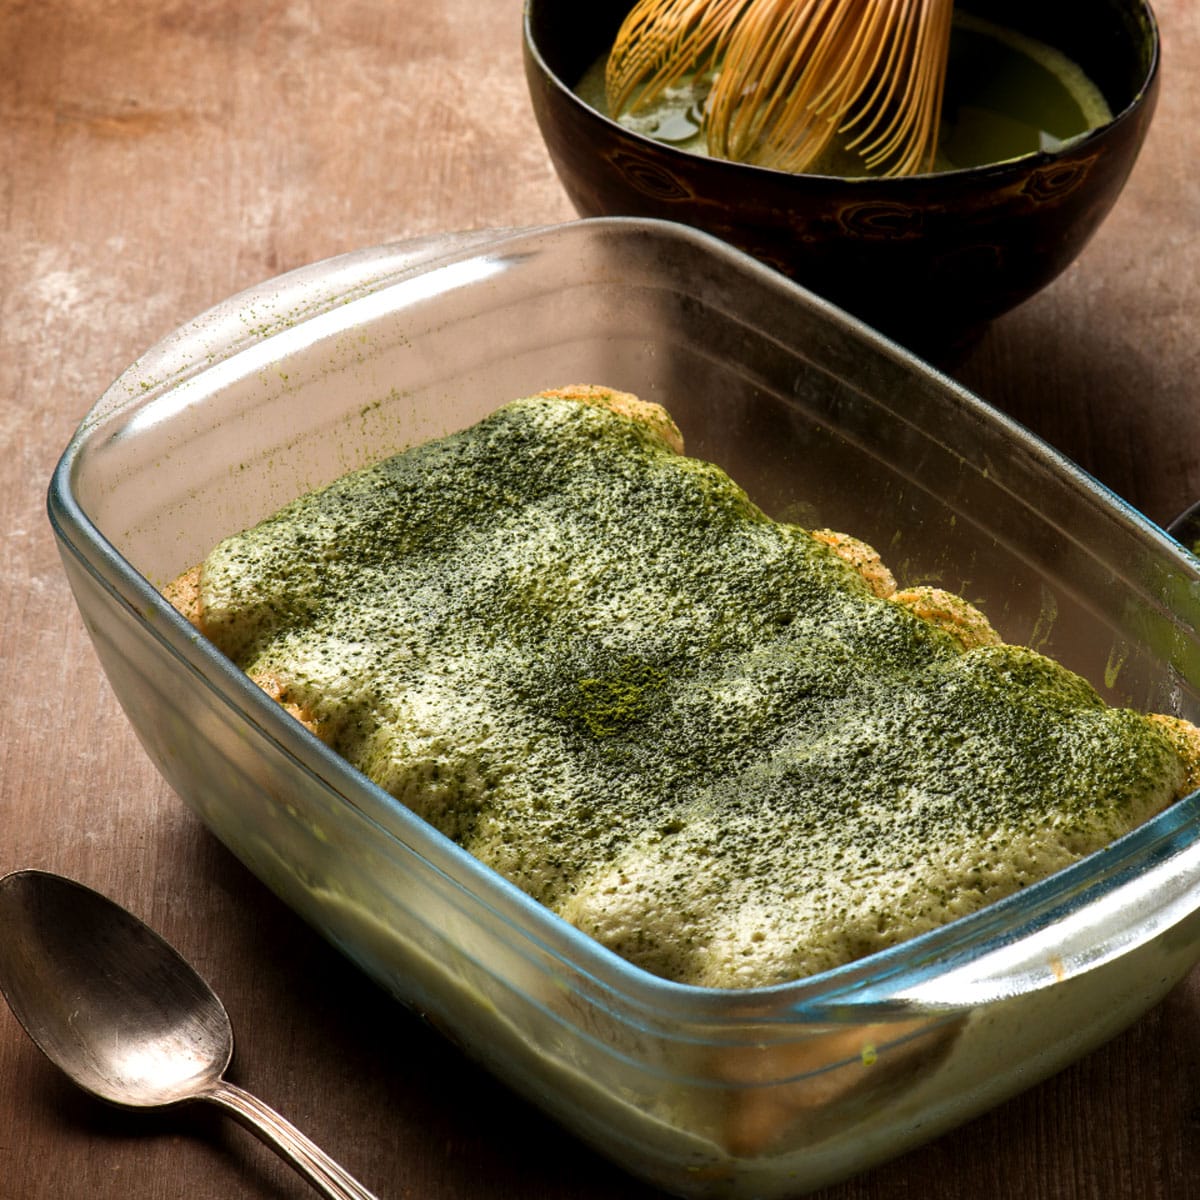 Why This Matcha Tiramisu Recipe Shines? The traditional Italian Tiramisu recipe often calls for raw eggs whisked over a double boiler, which can be tricky even for seasoned bakers. In this recipe, we switch things up by using fresh whipped cream.